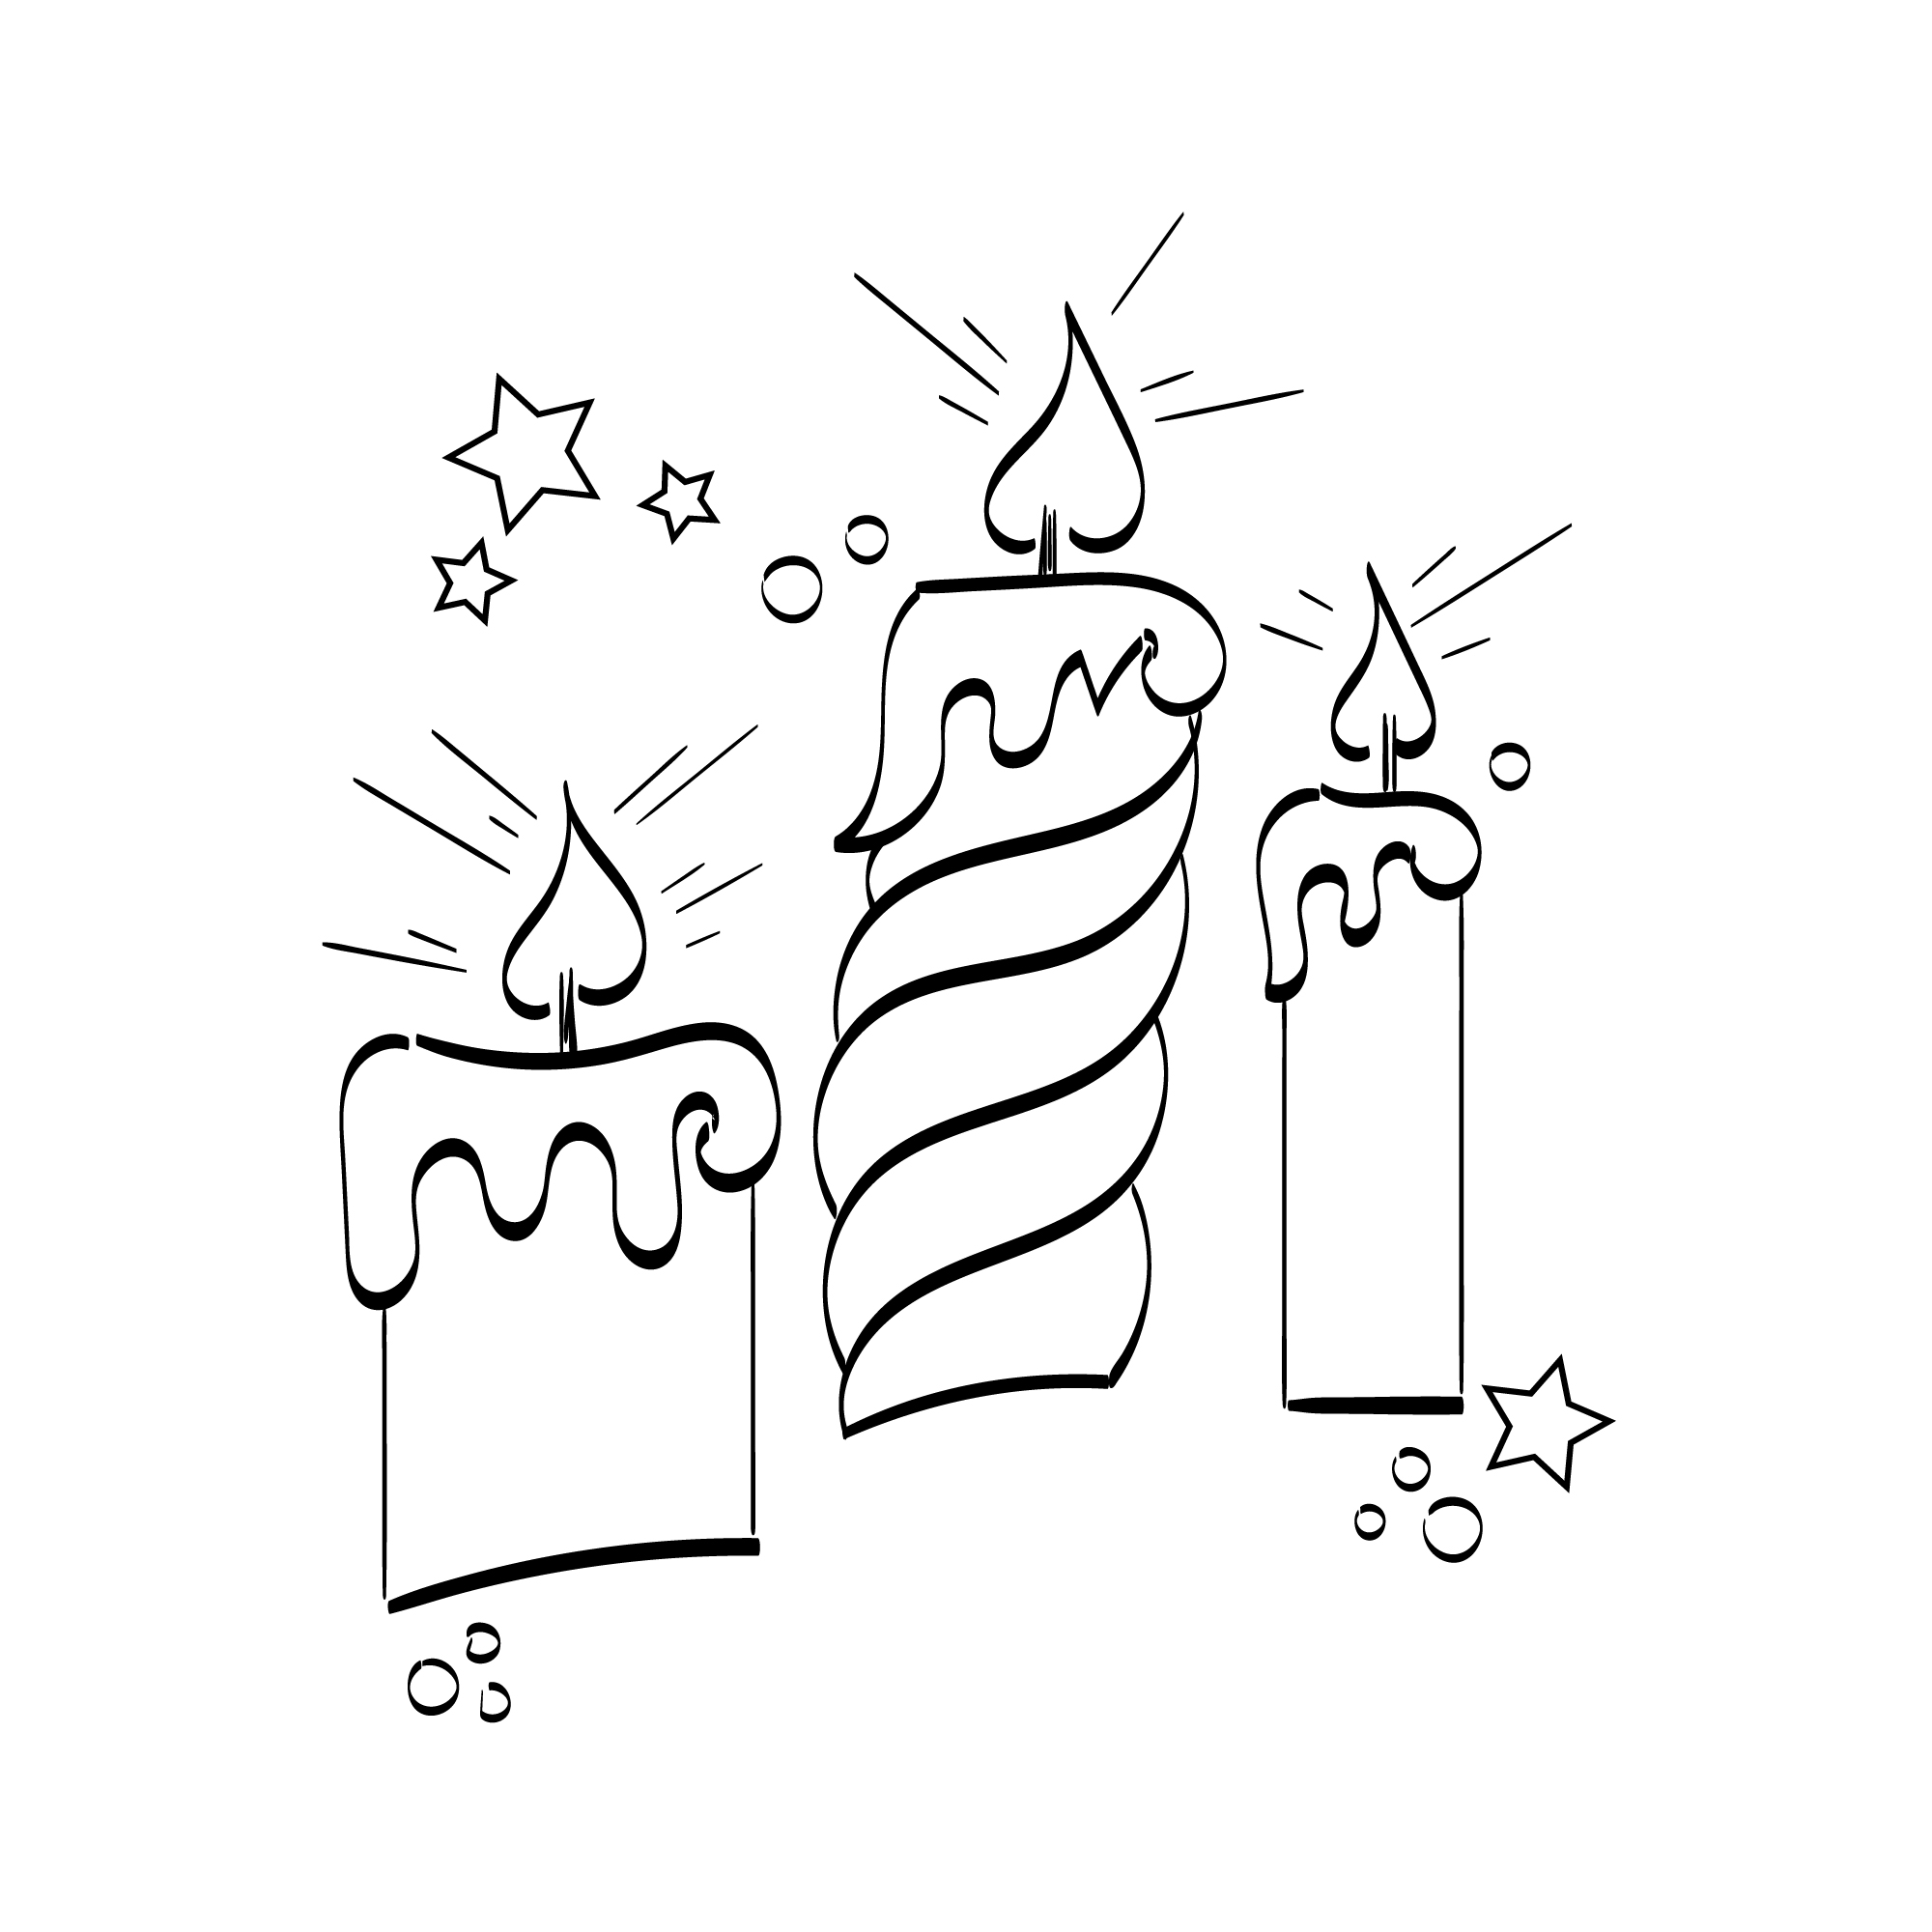 Gorgeous Pencil Drawing of Christmas Candles.